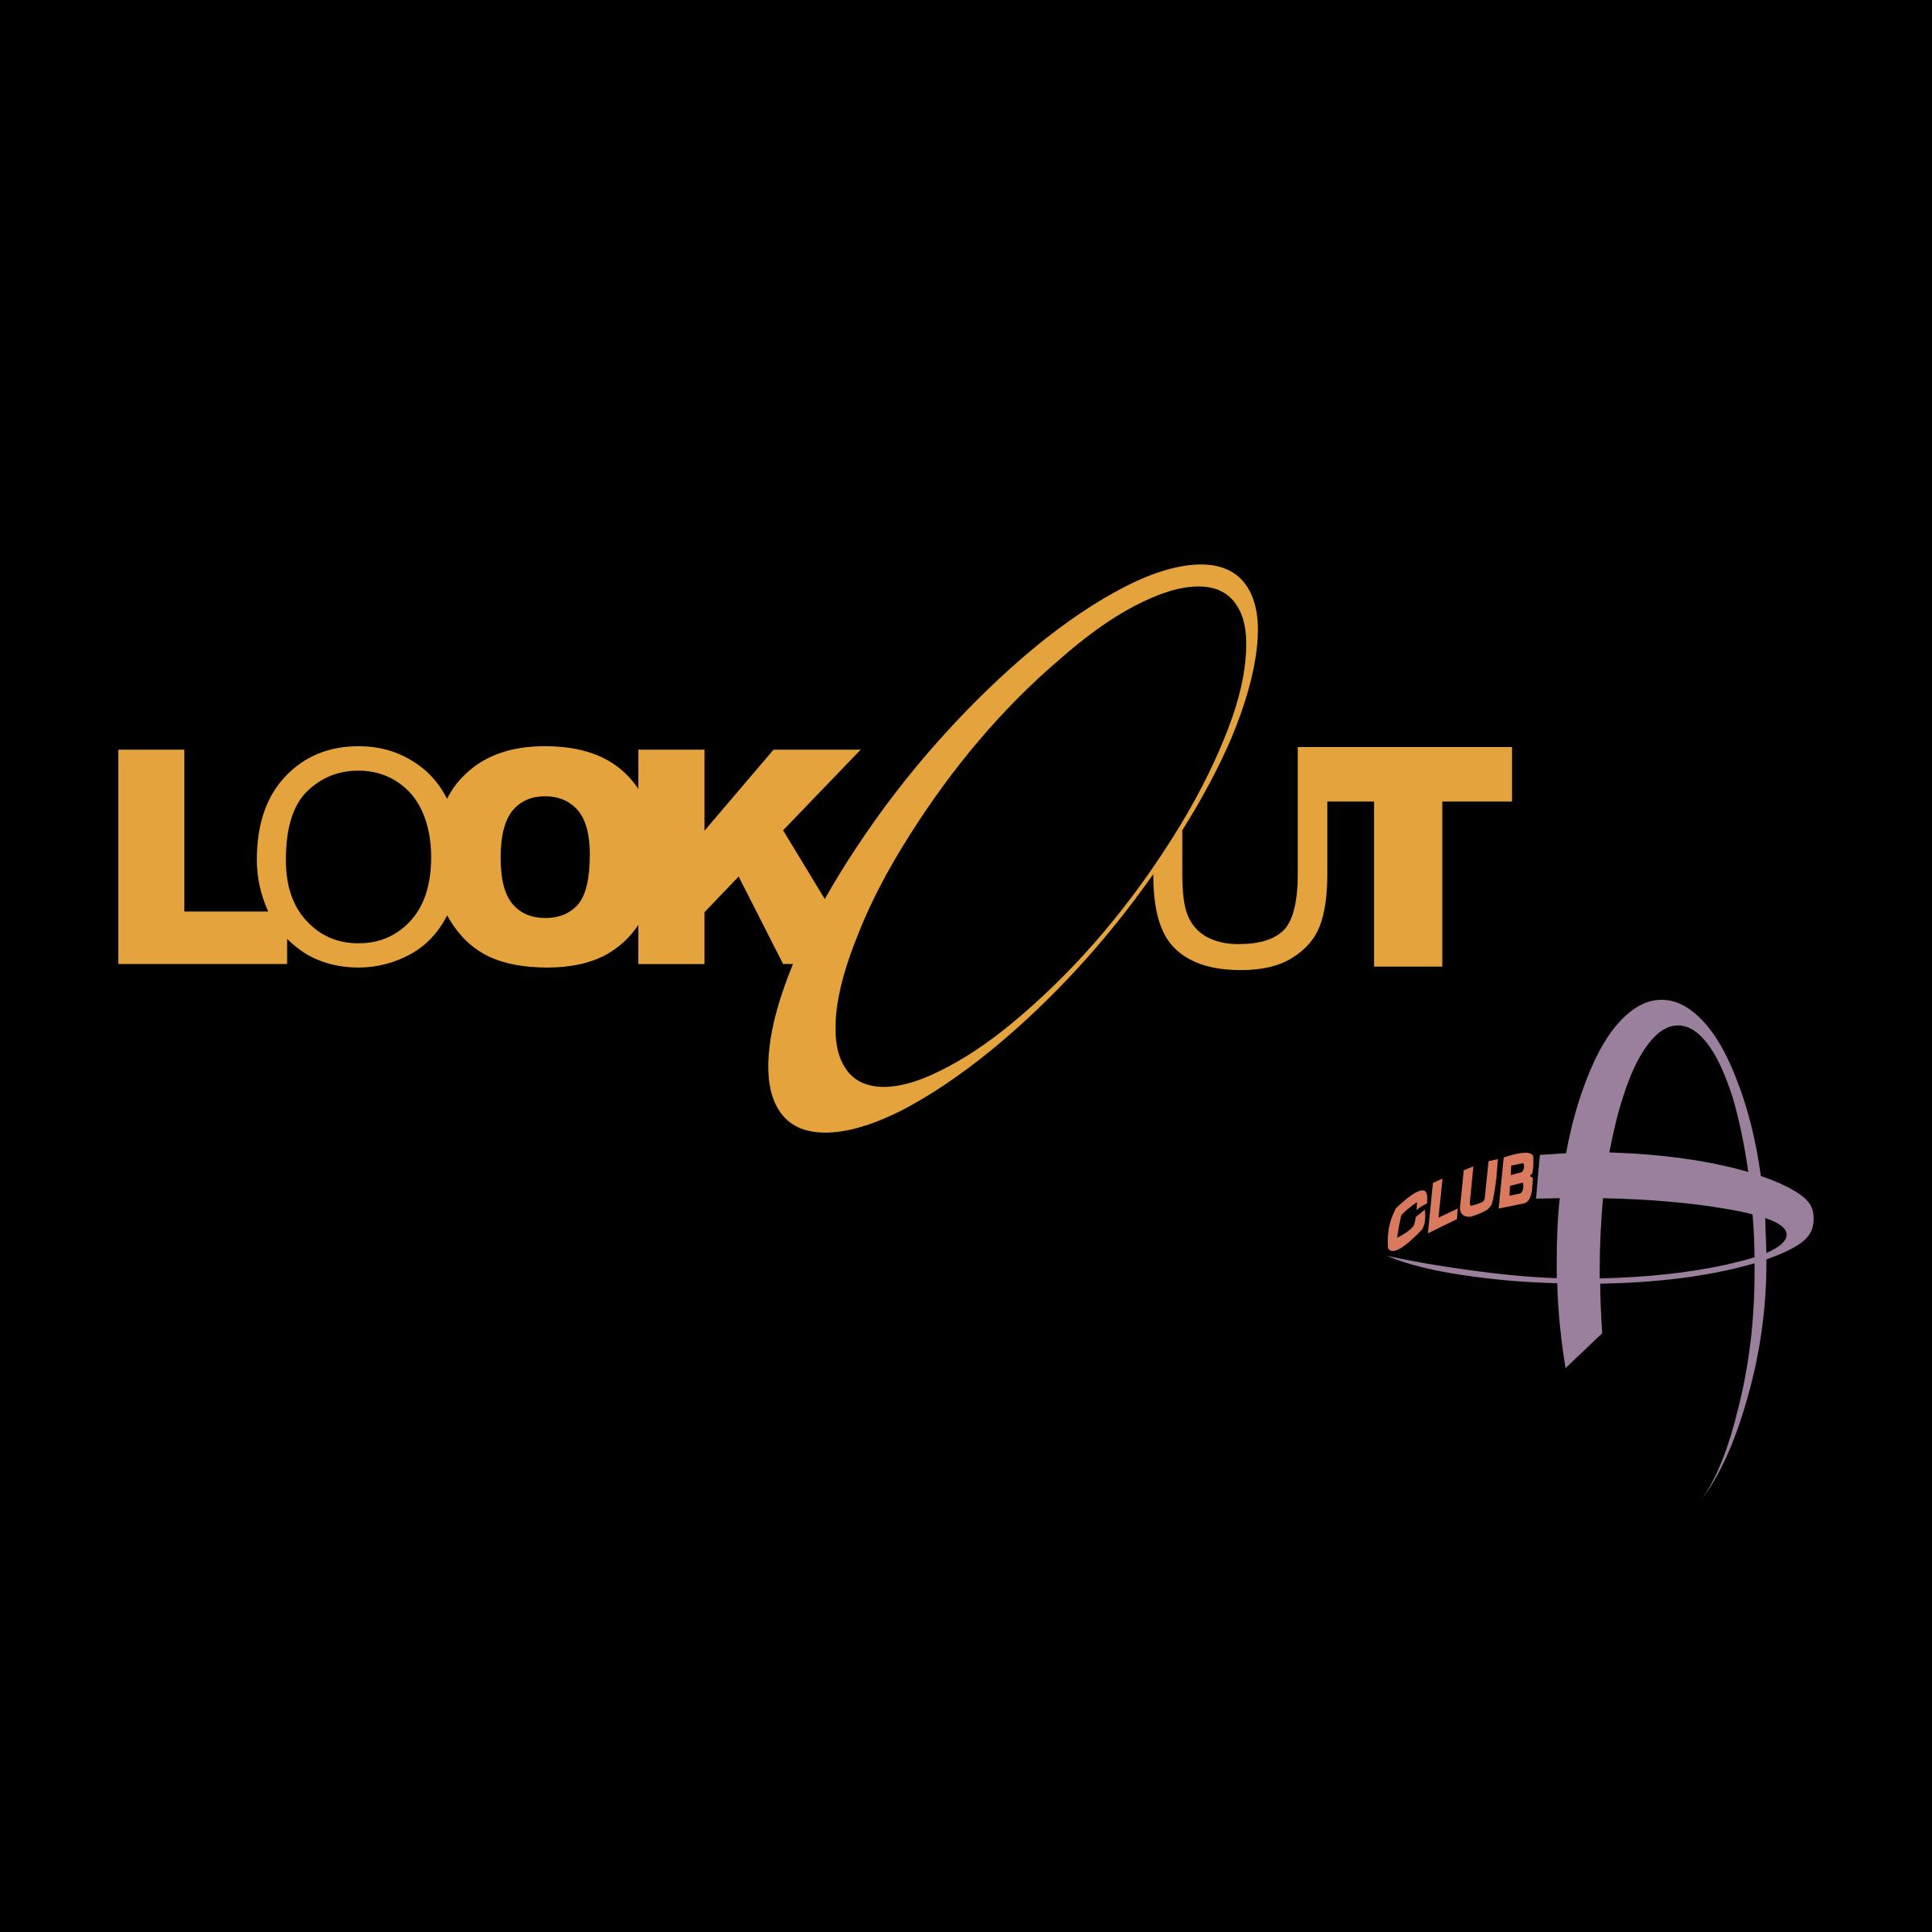 Lookout Logo - The LookOut & Club Logo PNG Transparent & SVG Vector